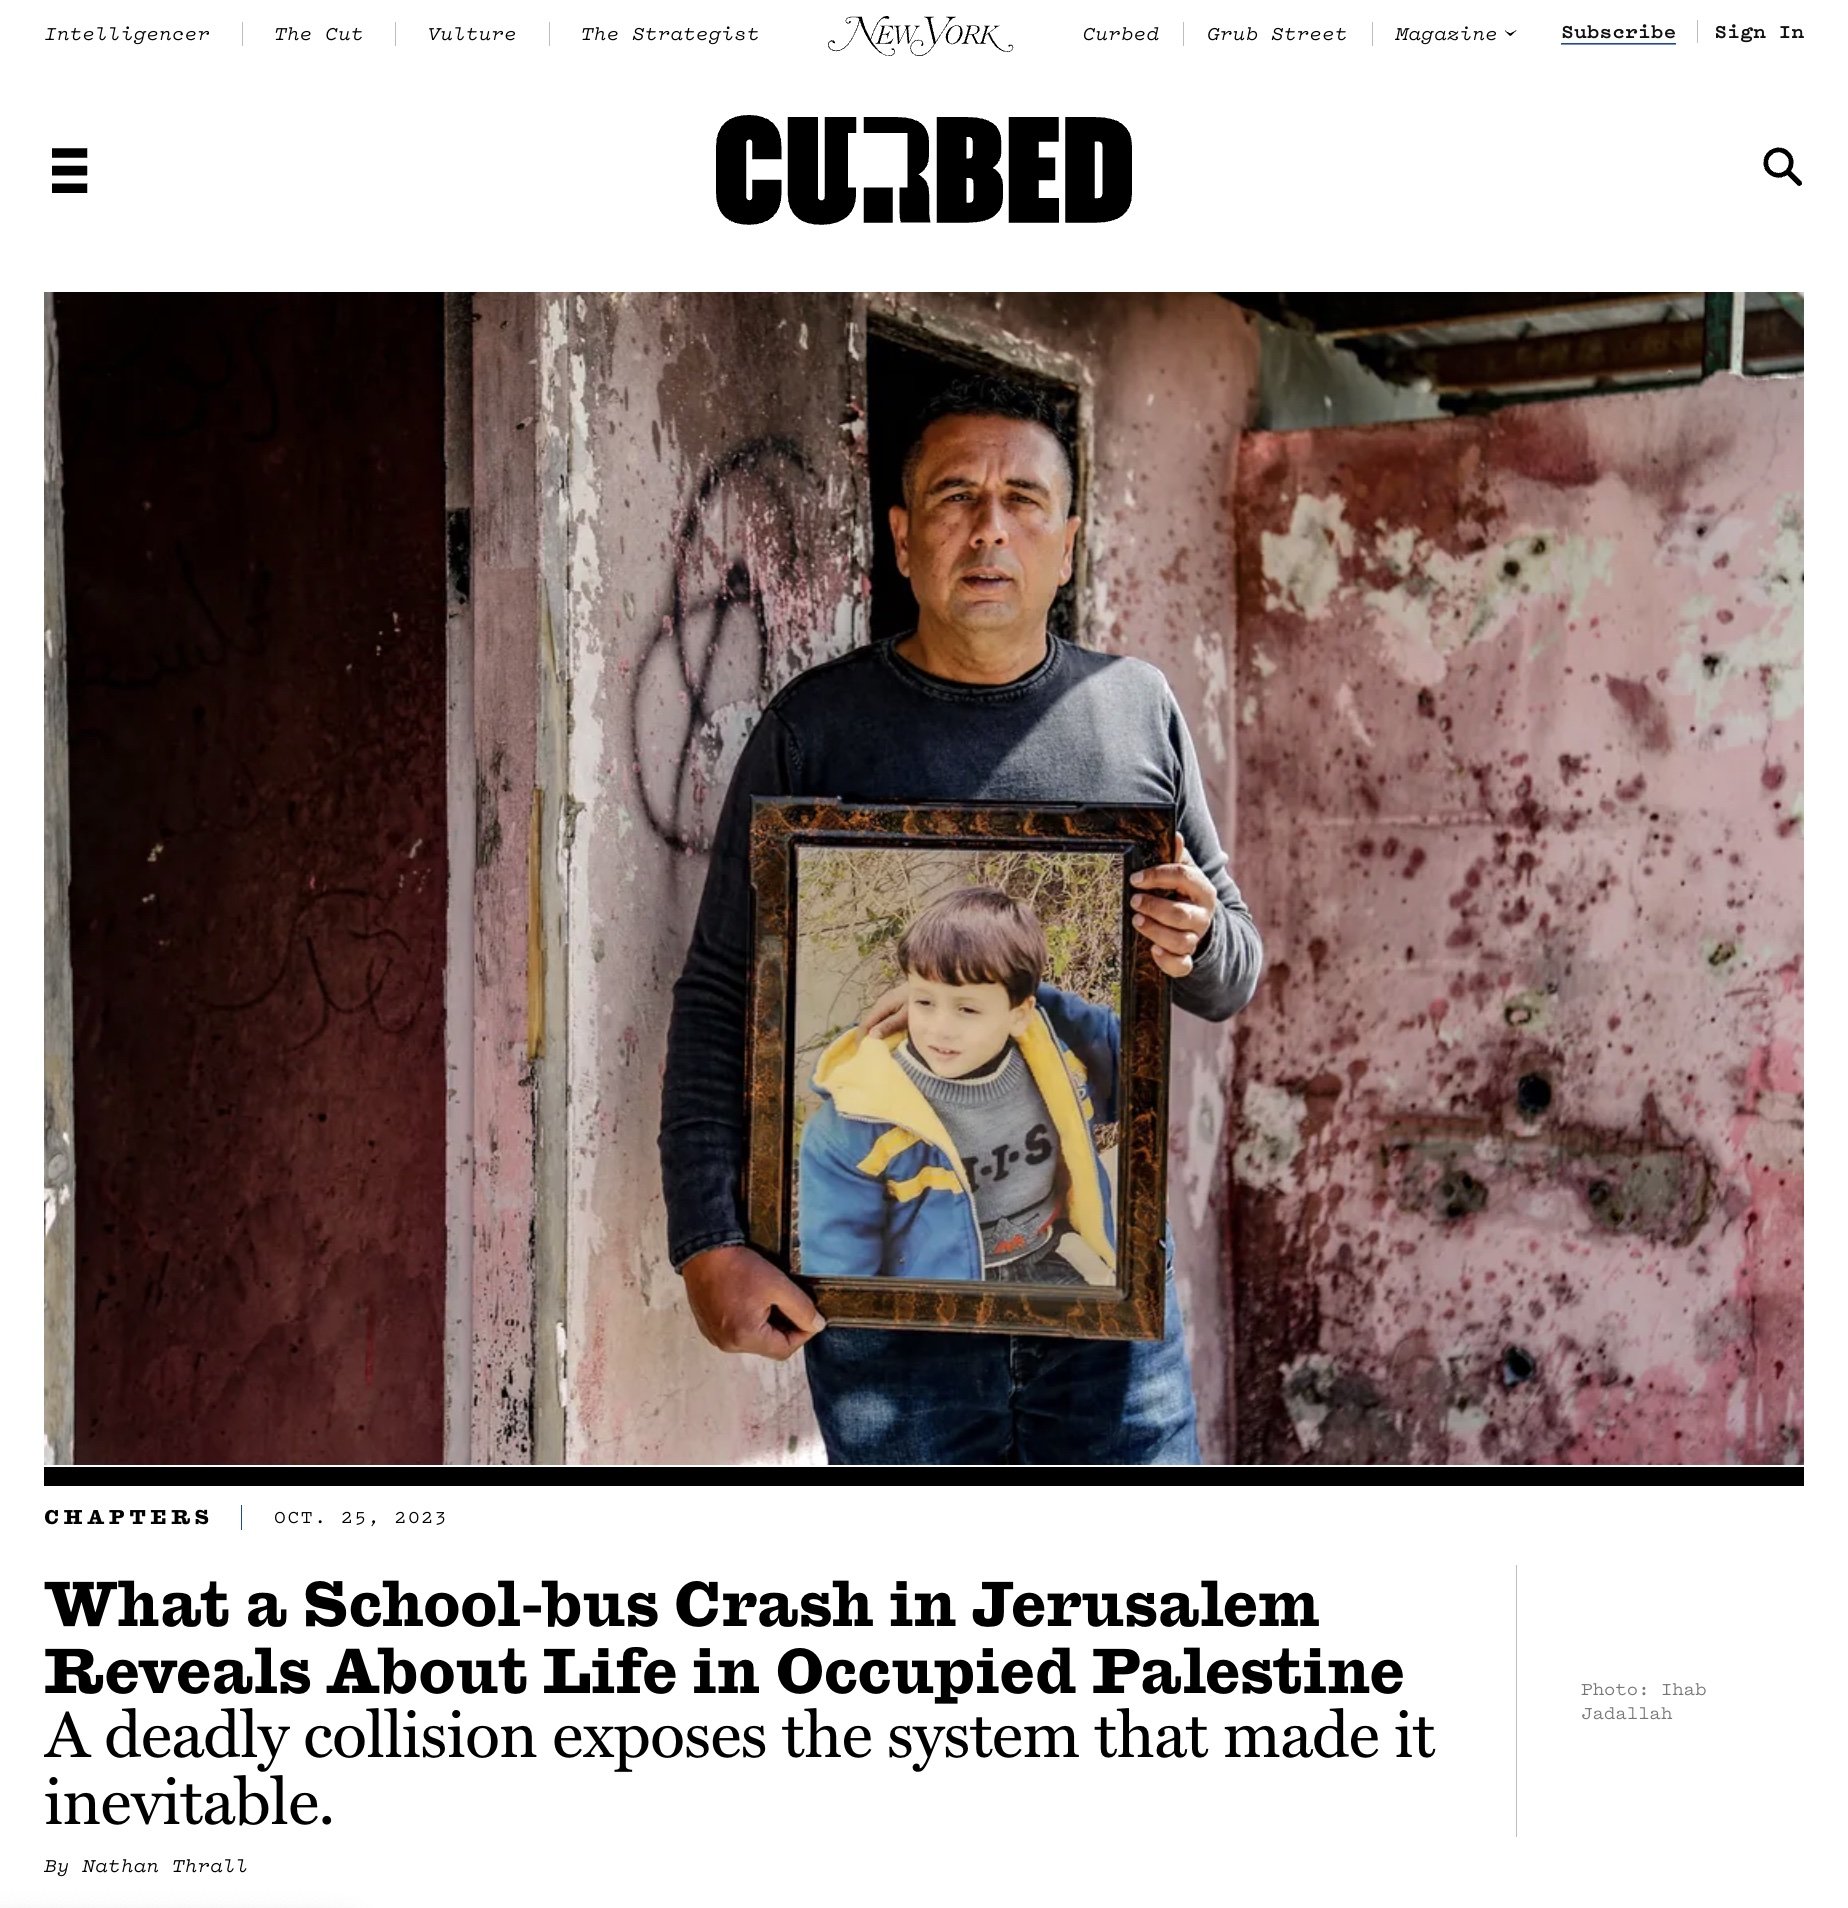 New York Magazine - What a School-bus Crash Reveals About Life in Occupied Palestine